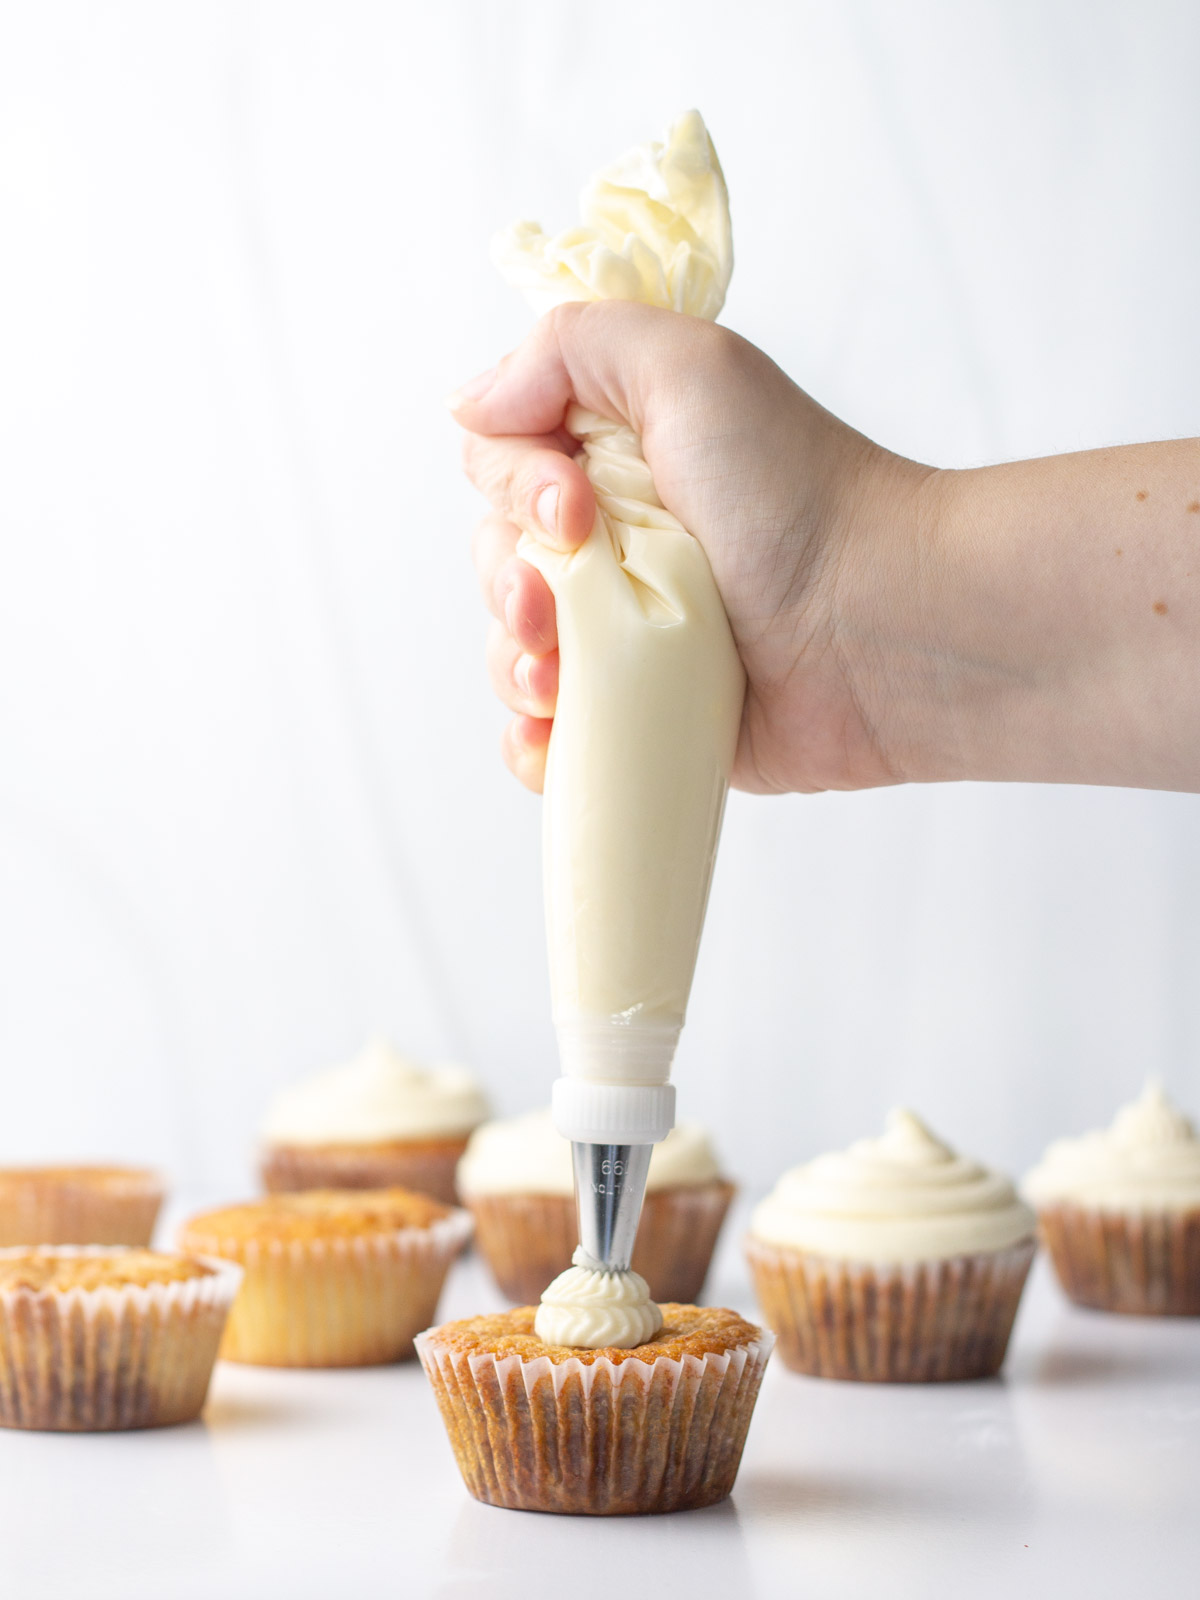 A hand piping marshmallow frosting onto a cinnamon cupcake with frosted and unfrosted cupcakes in the background.